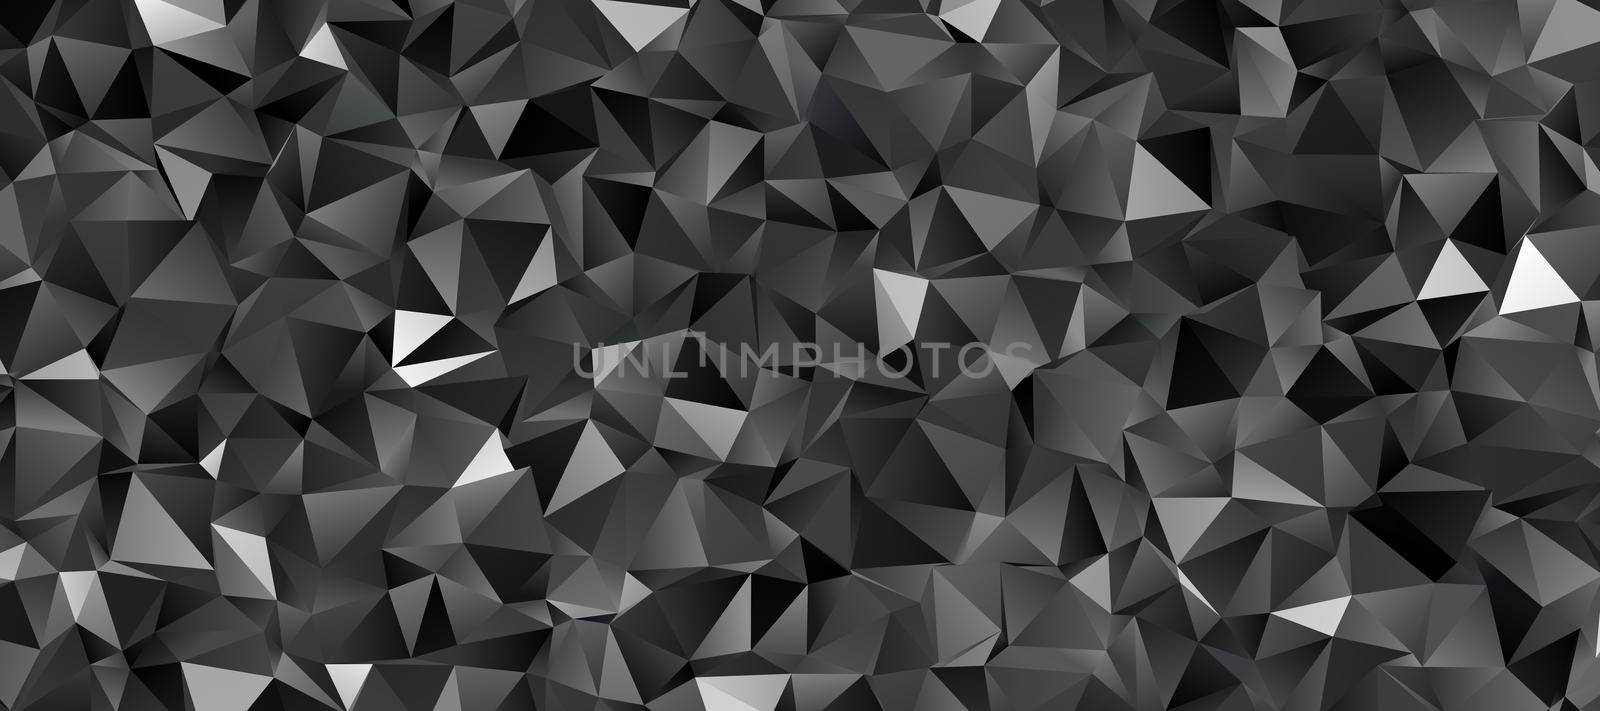 Abstract black triangle background, low poly pattern illustration